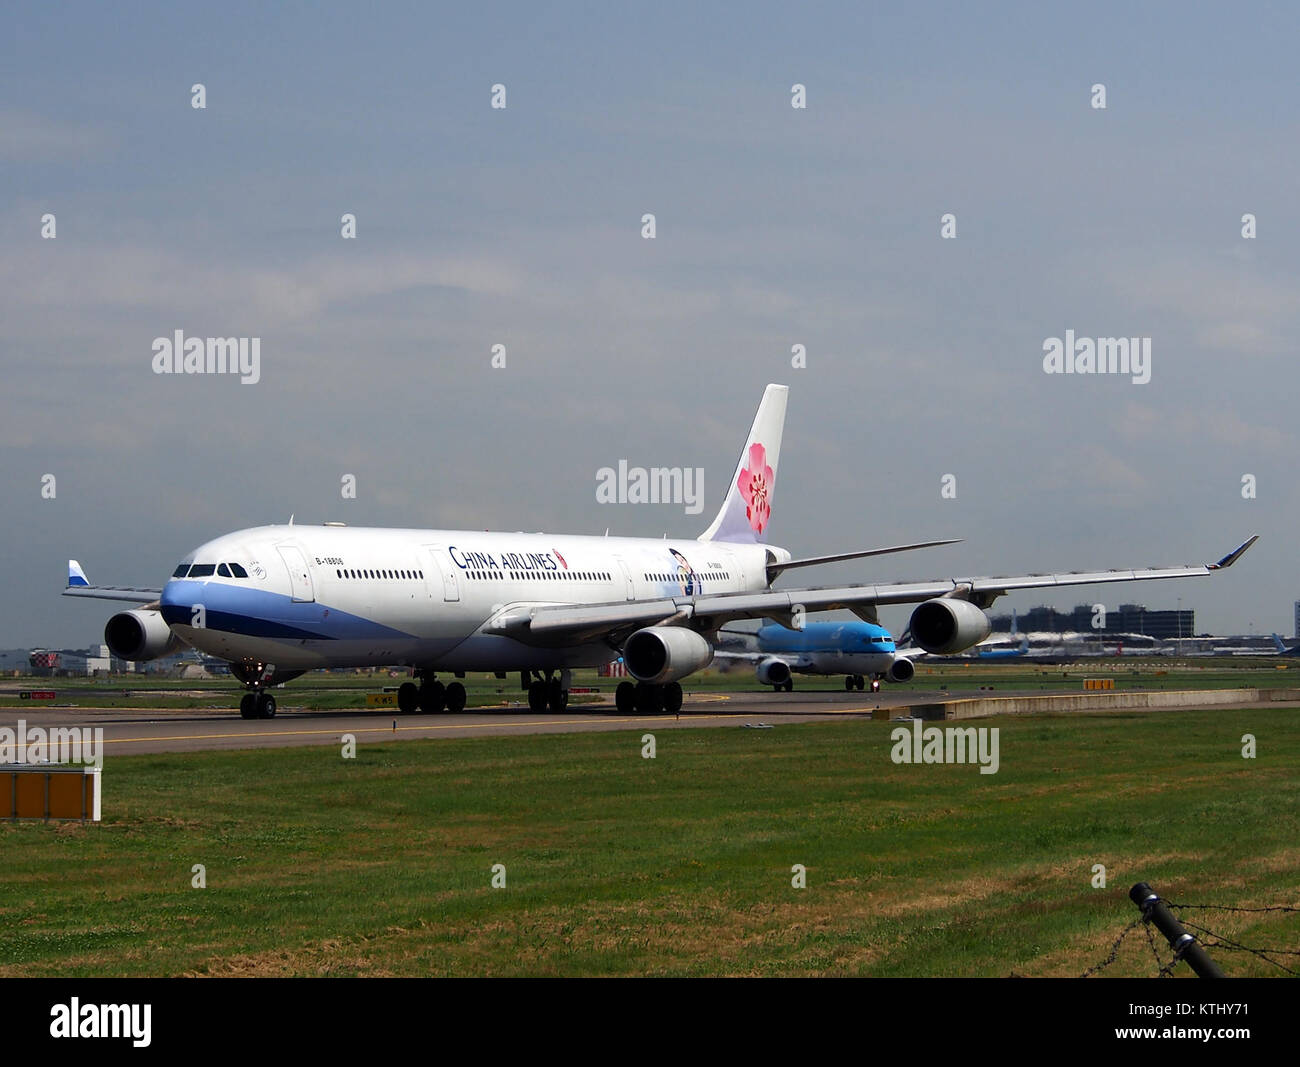 B 18806 China Airlines Airbus A340 313X   cn 433 pic1 Stock Photo